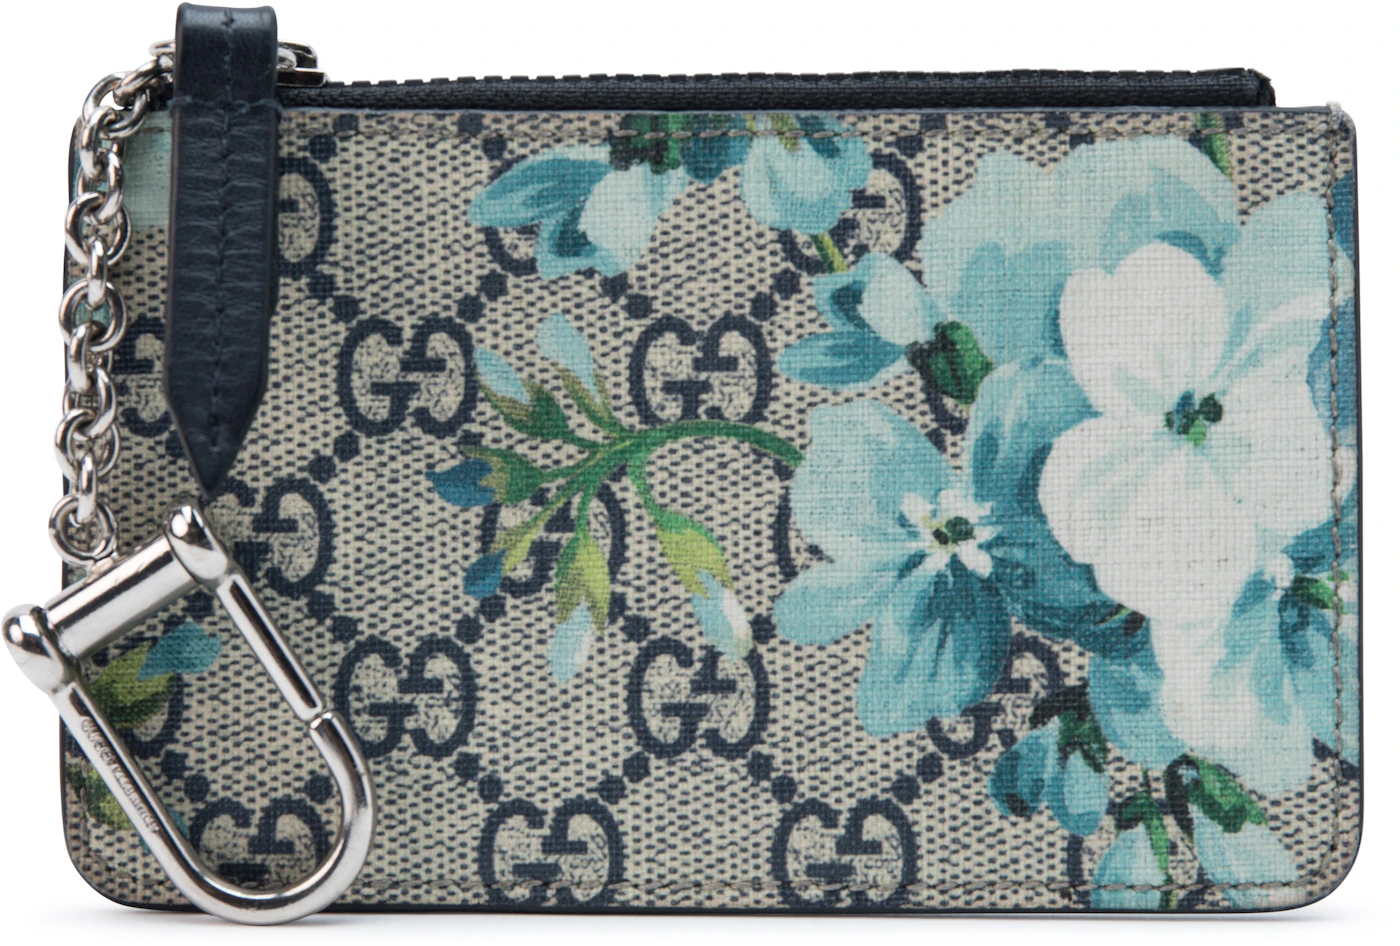 Gucci Coin Wallet Monogram GG Supreme Blooms Blue in Coated Canvas